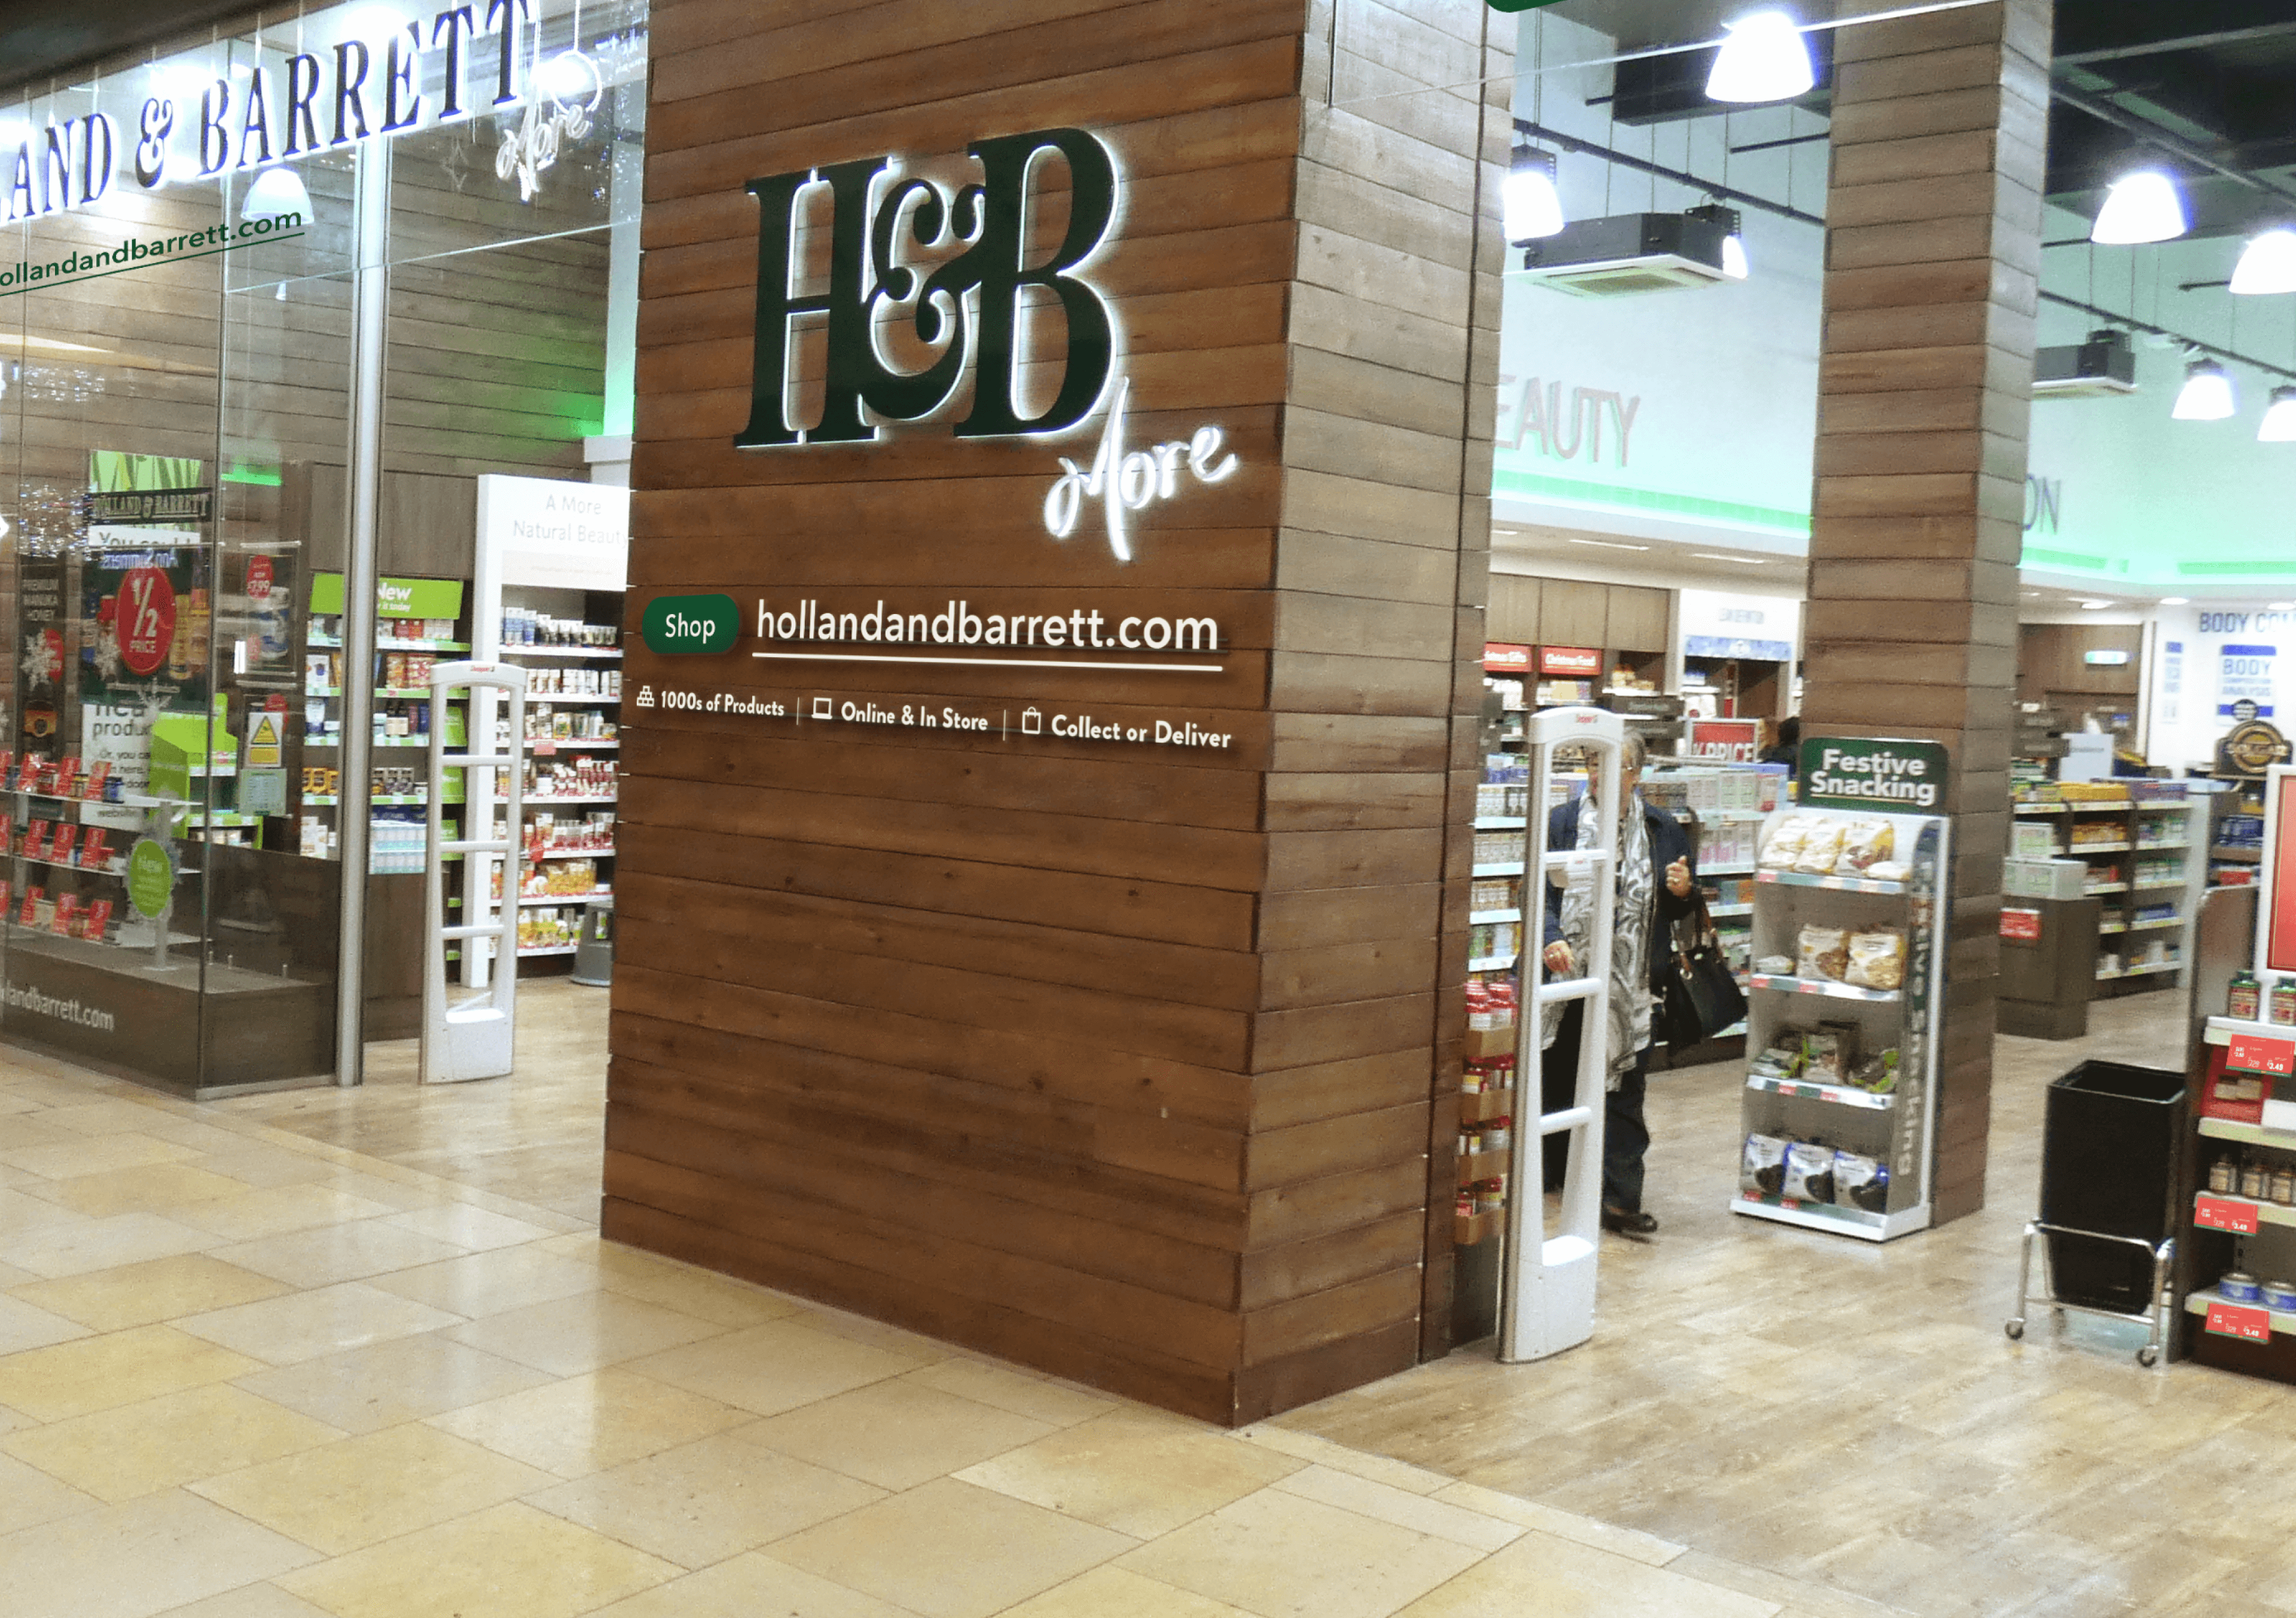 An image showing a Holland and Barrett store front internal